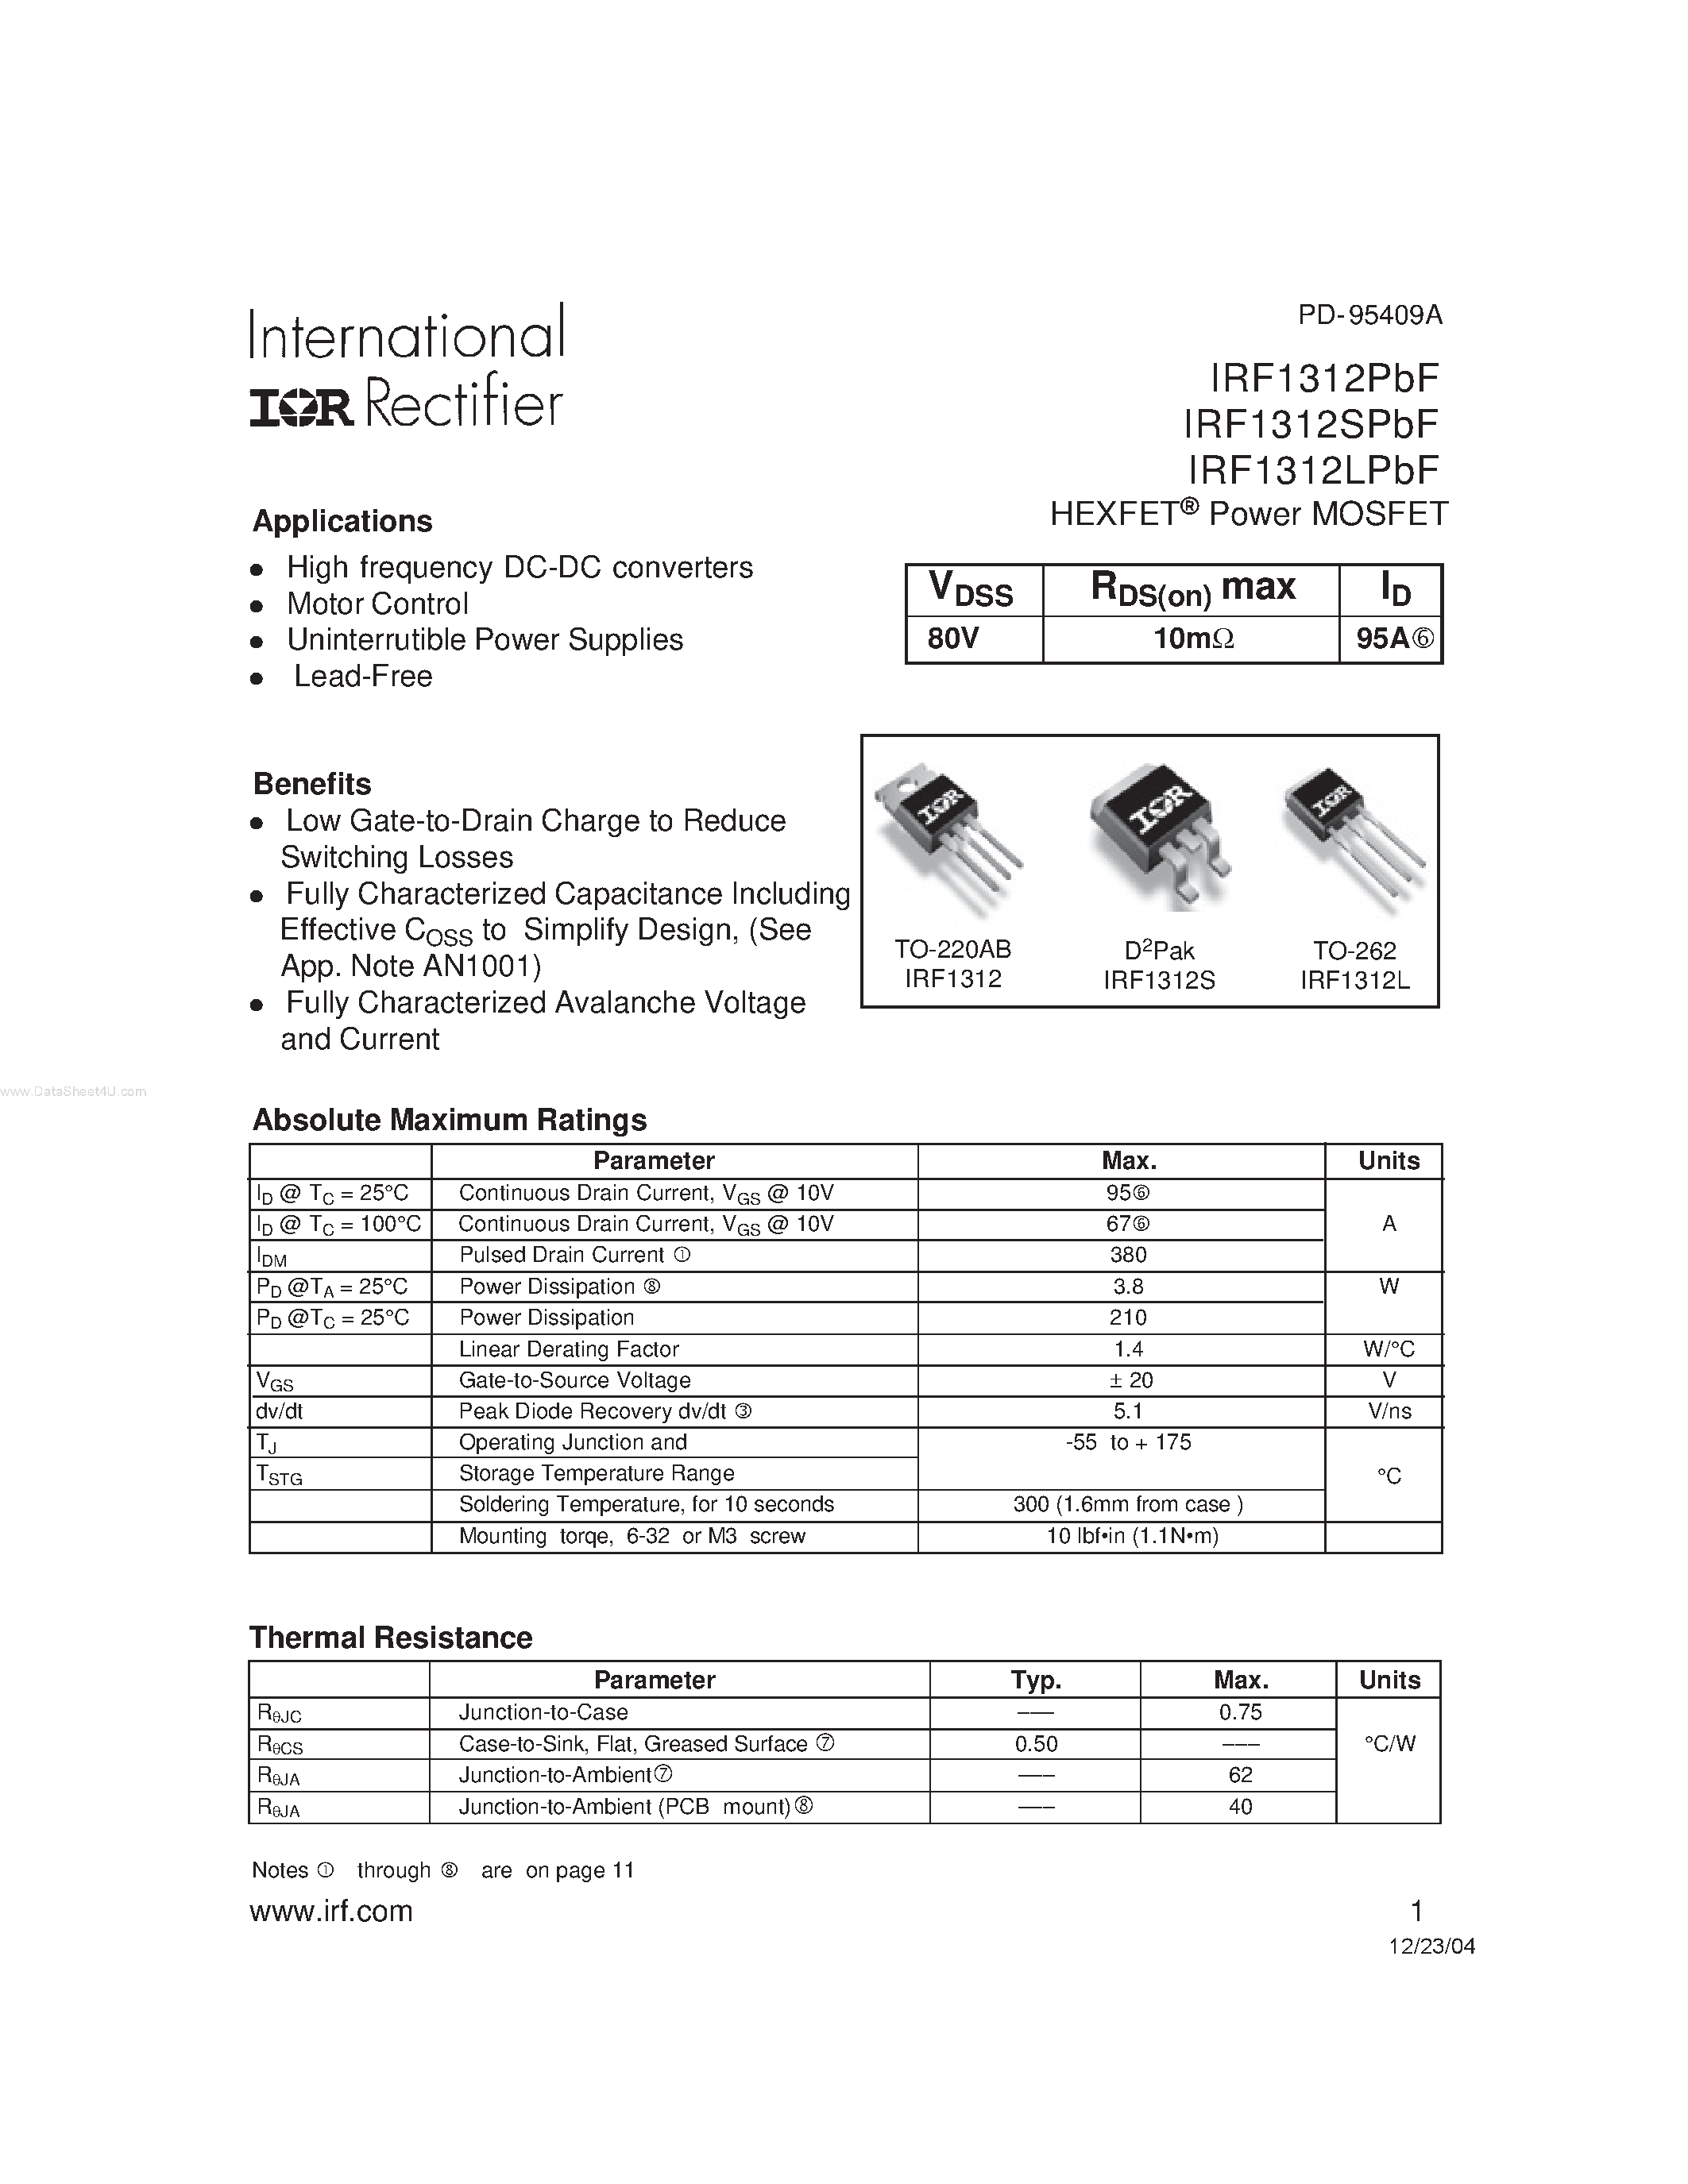 Datasheet IRF1312LPbF - (IRF1312xPbF) HEXFET Power MOSFET page 1